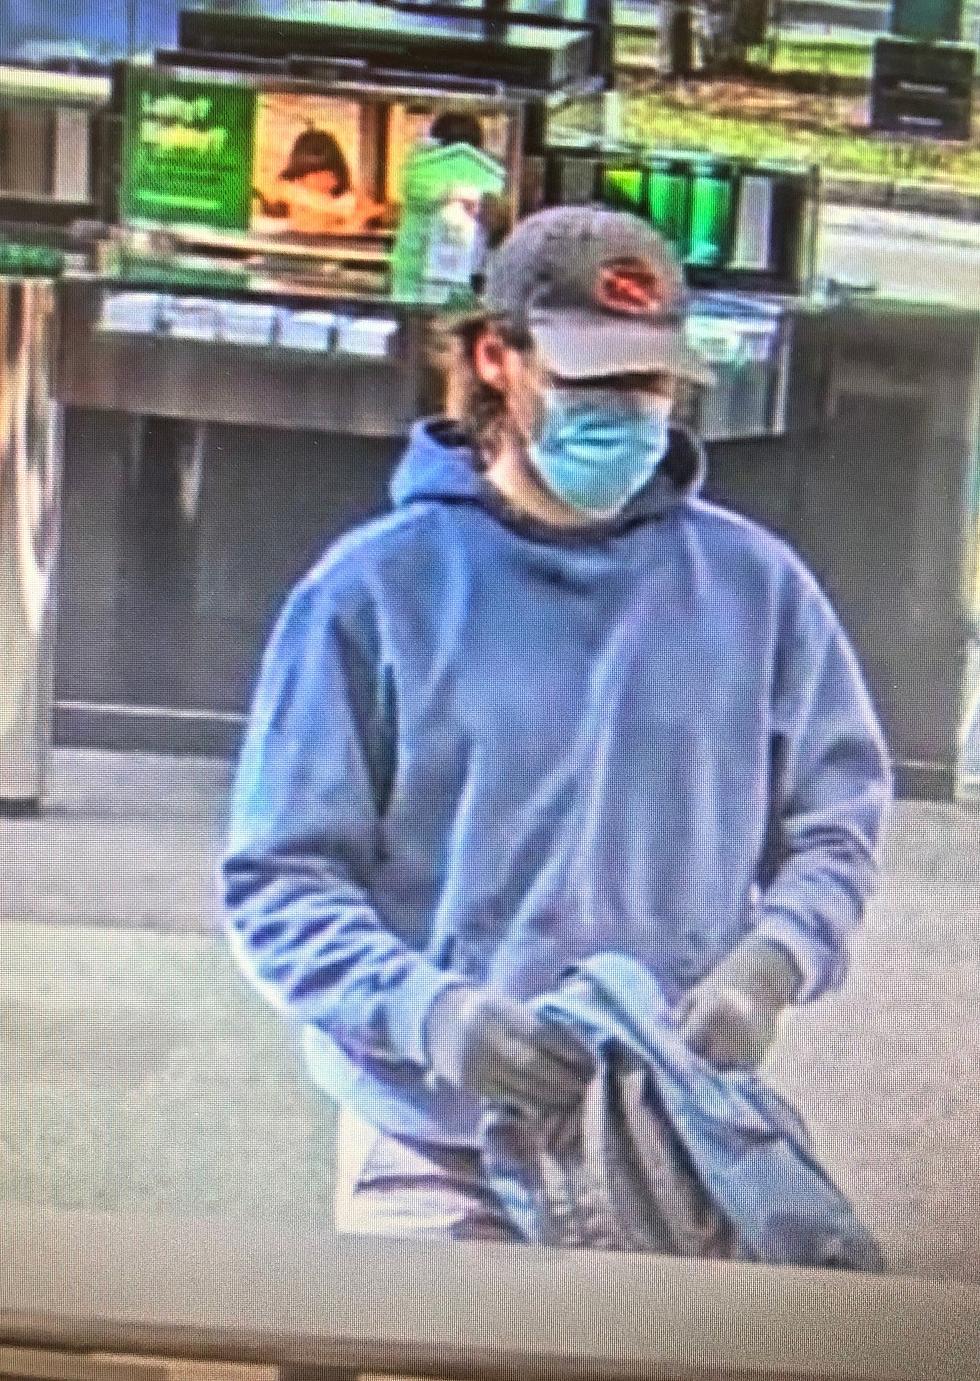 Police in Medford need your help finding bank robber